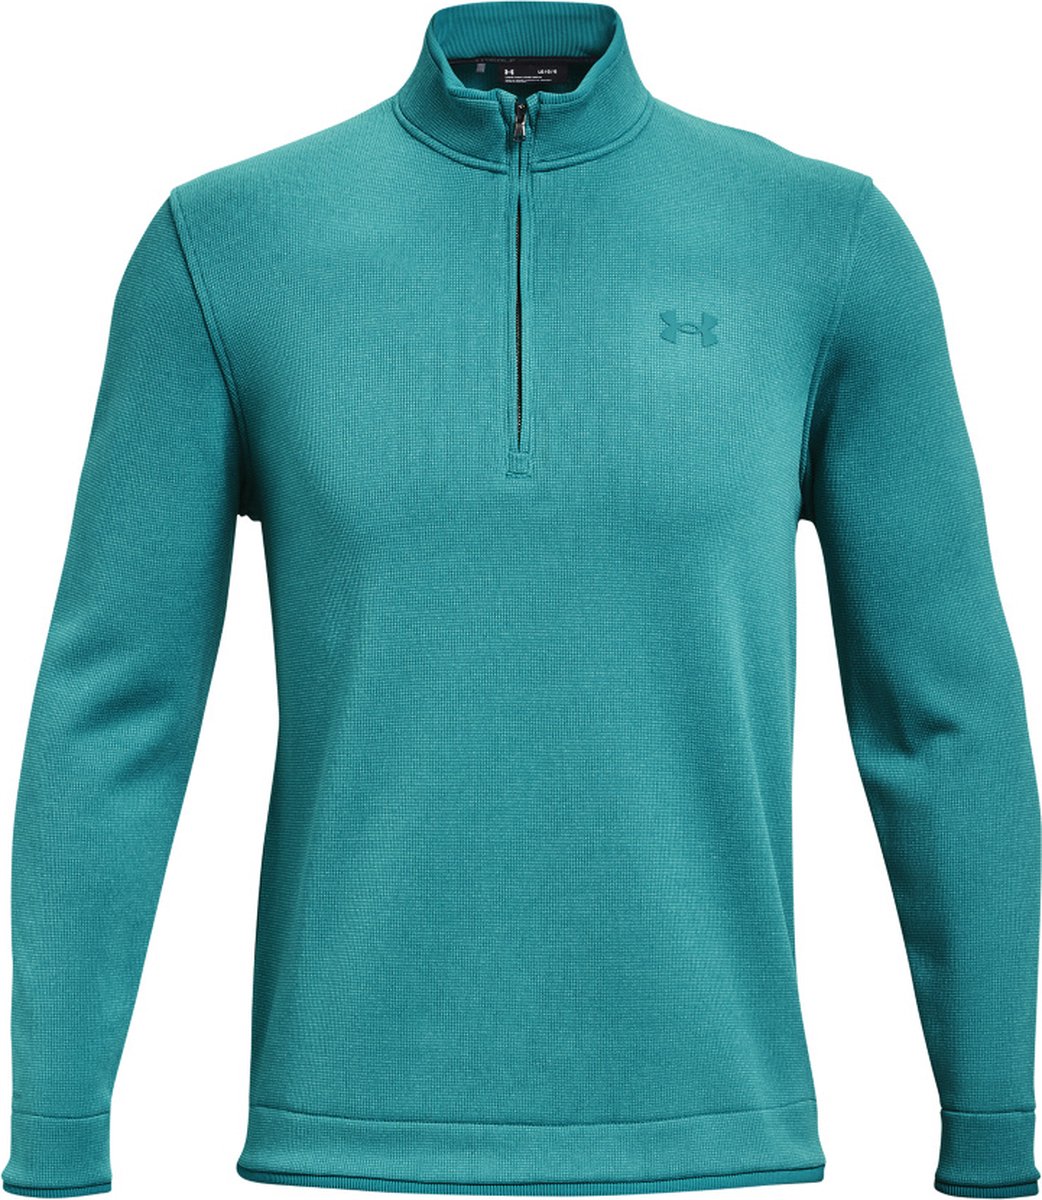 Under Armour Storm SF 1/2 Zip New Green